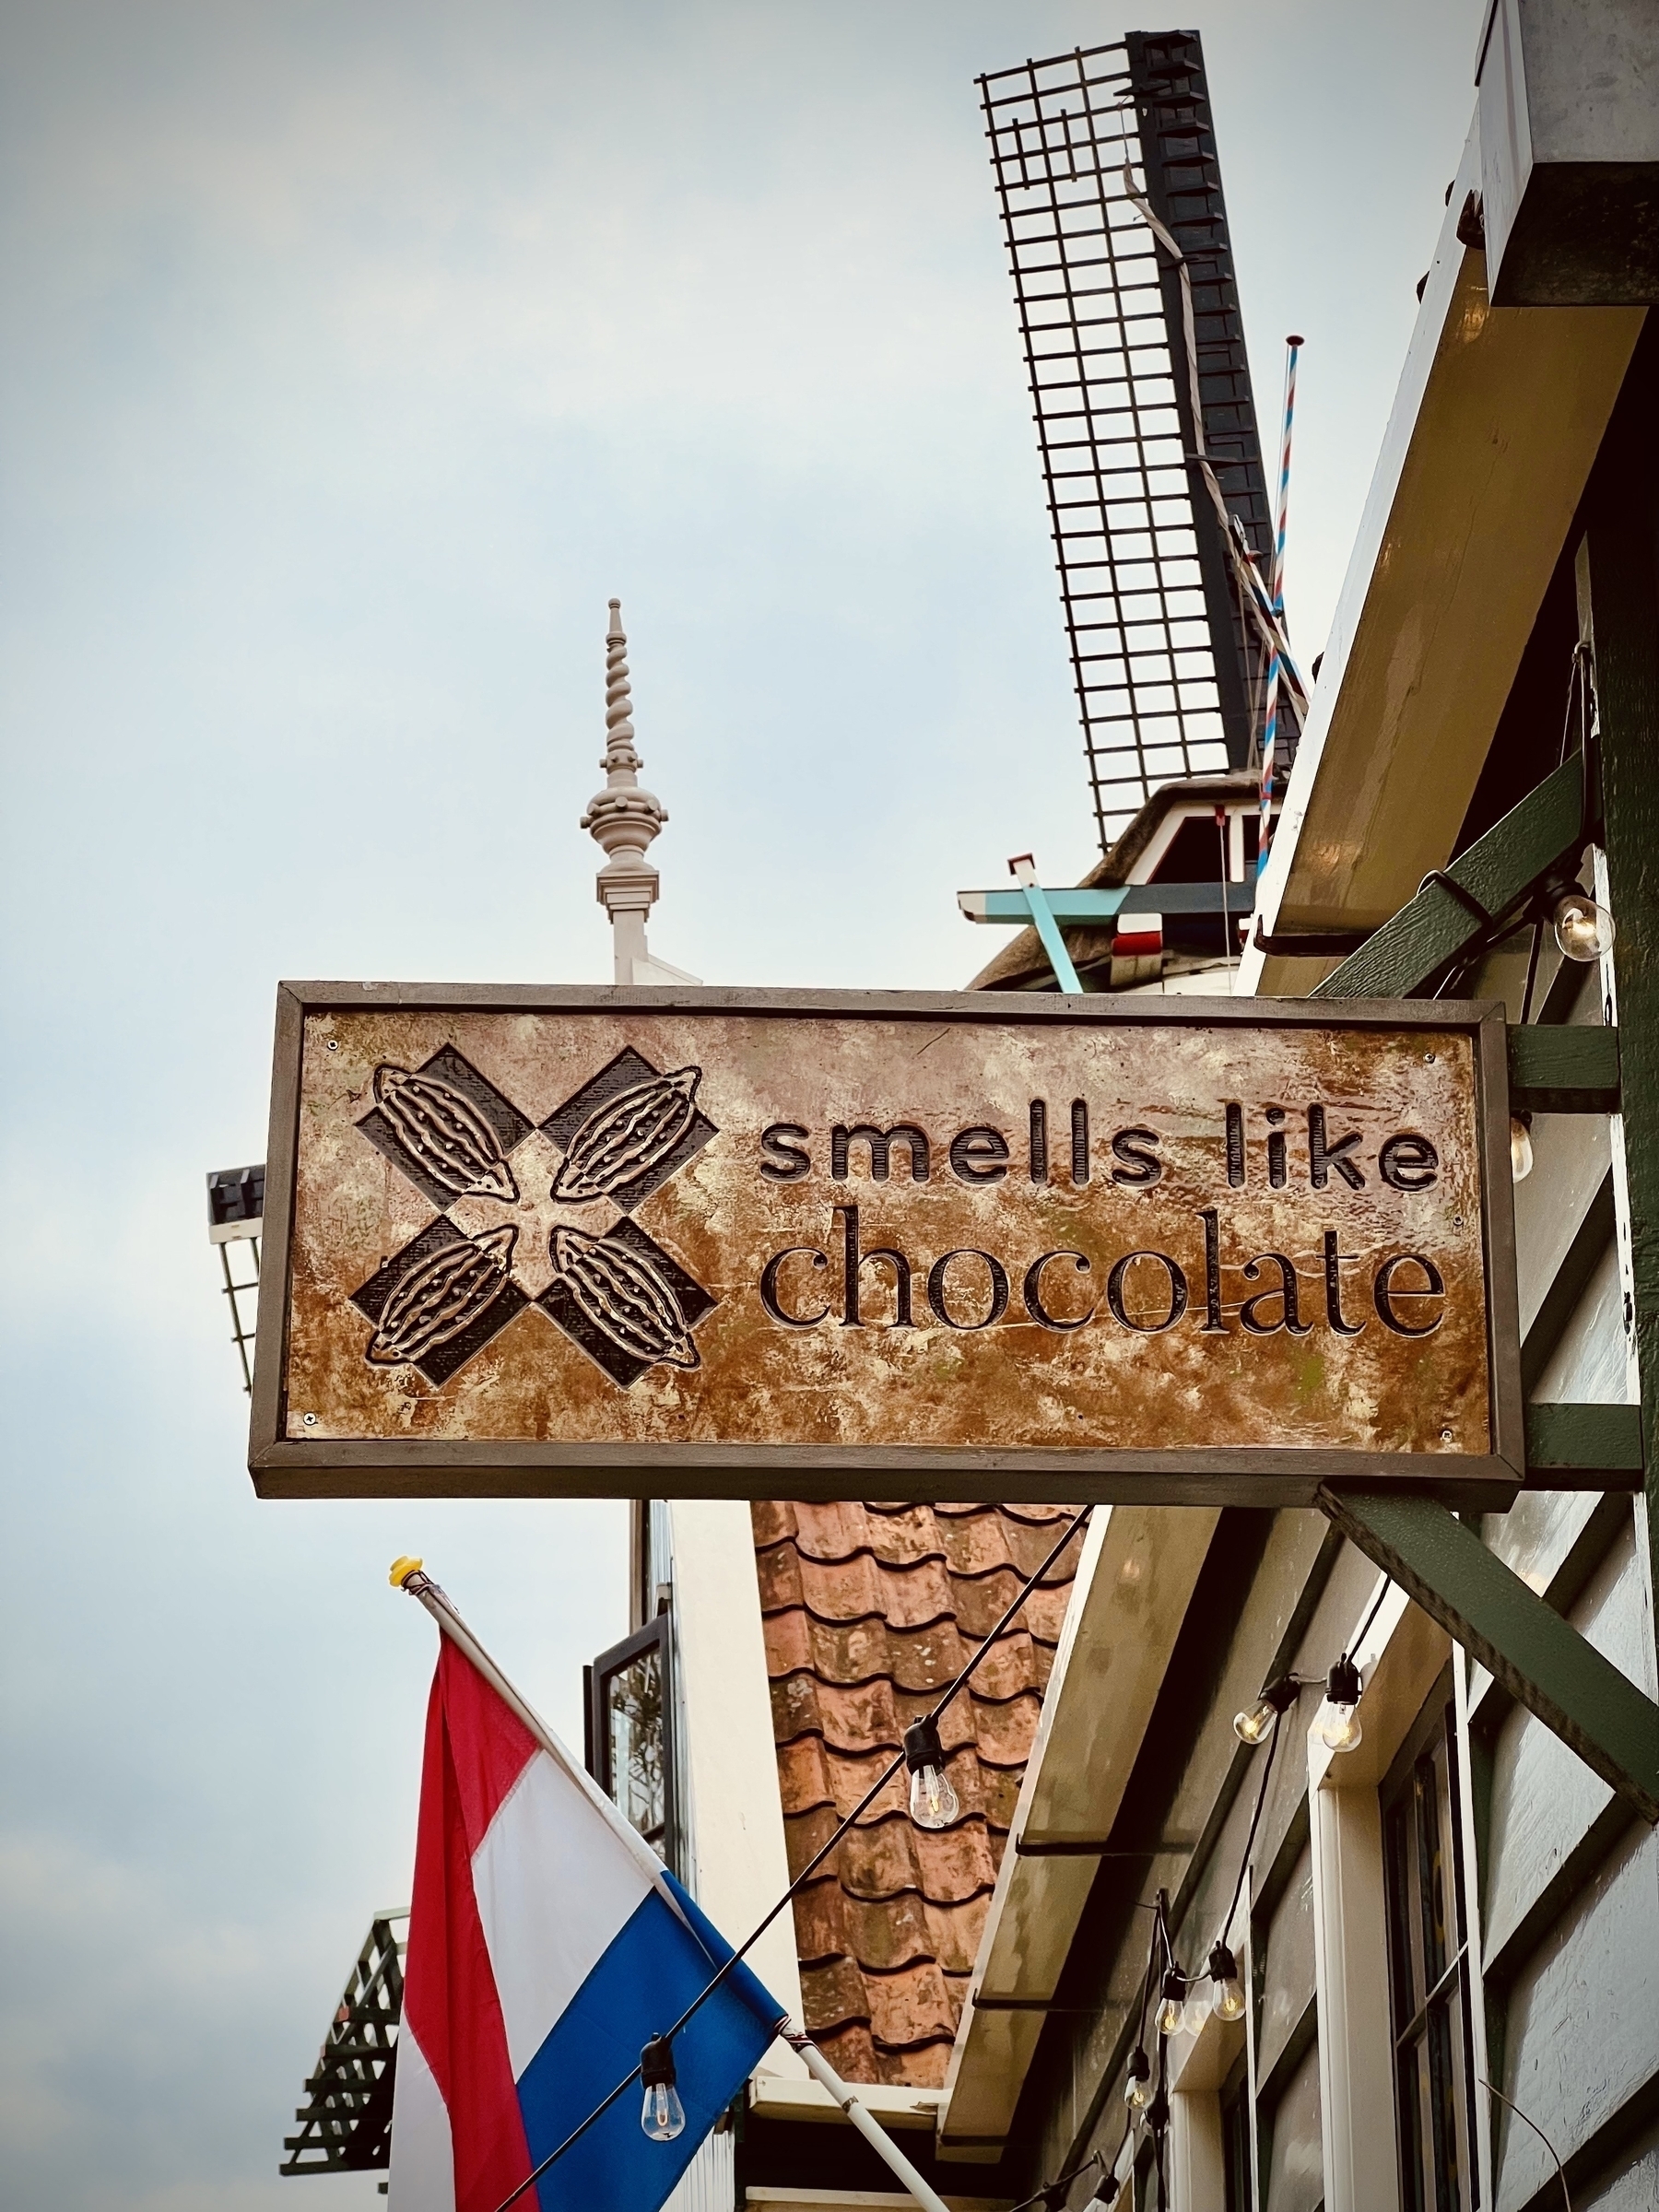 Sign saying “smells like chocolate”, with part of a windmill and the Dutch flag in the background 